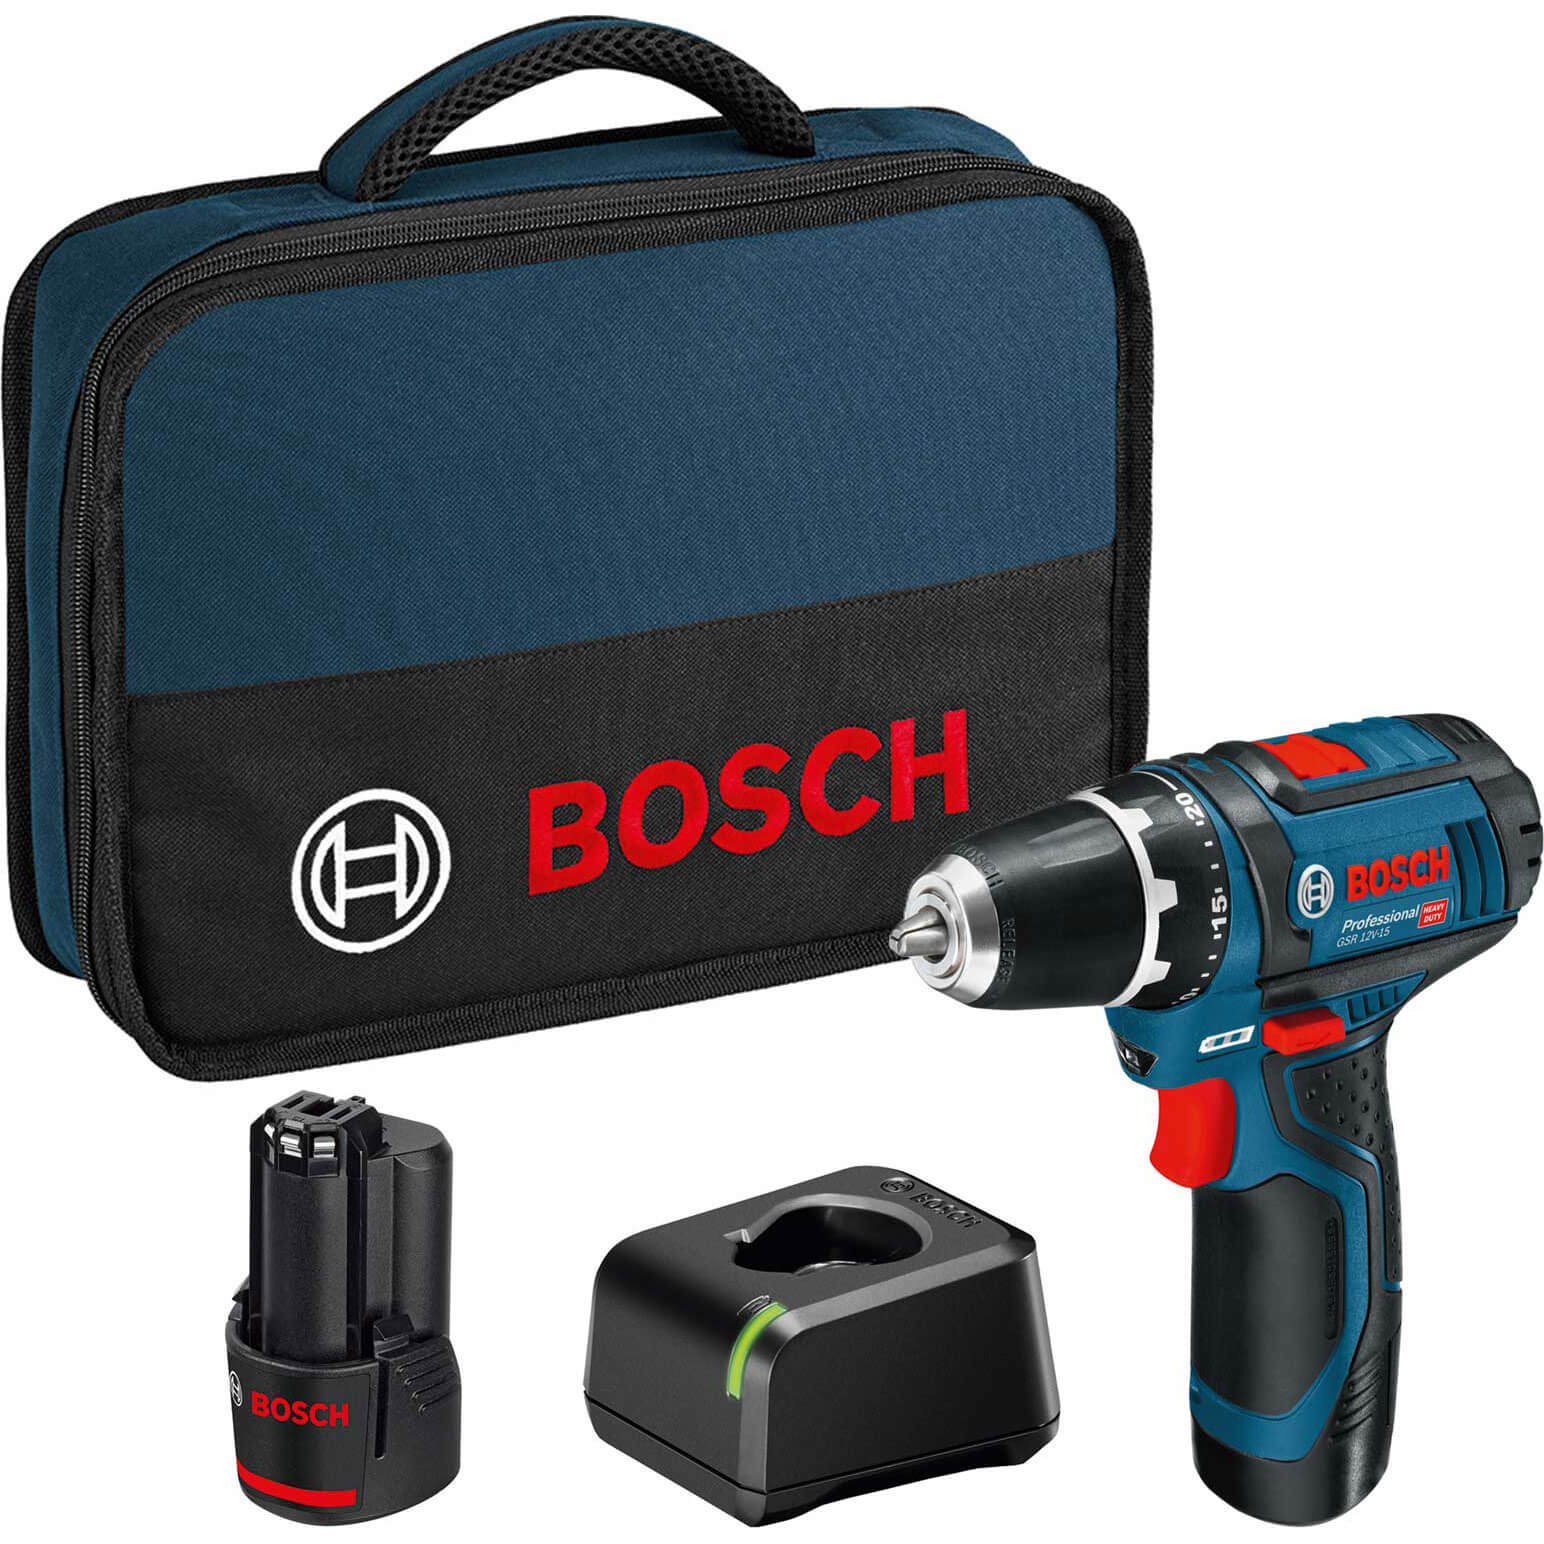 Bosch drill charger